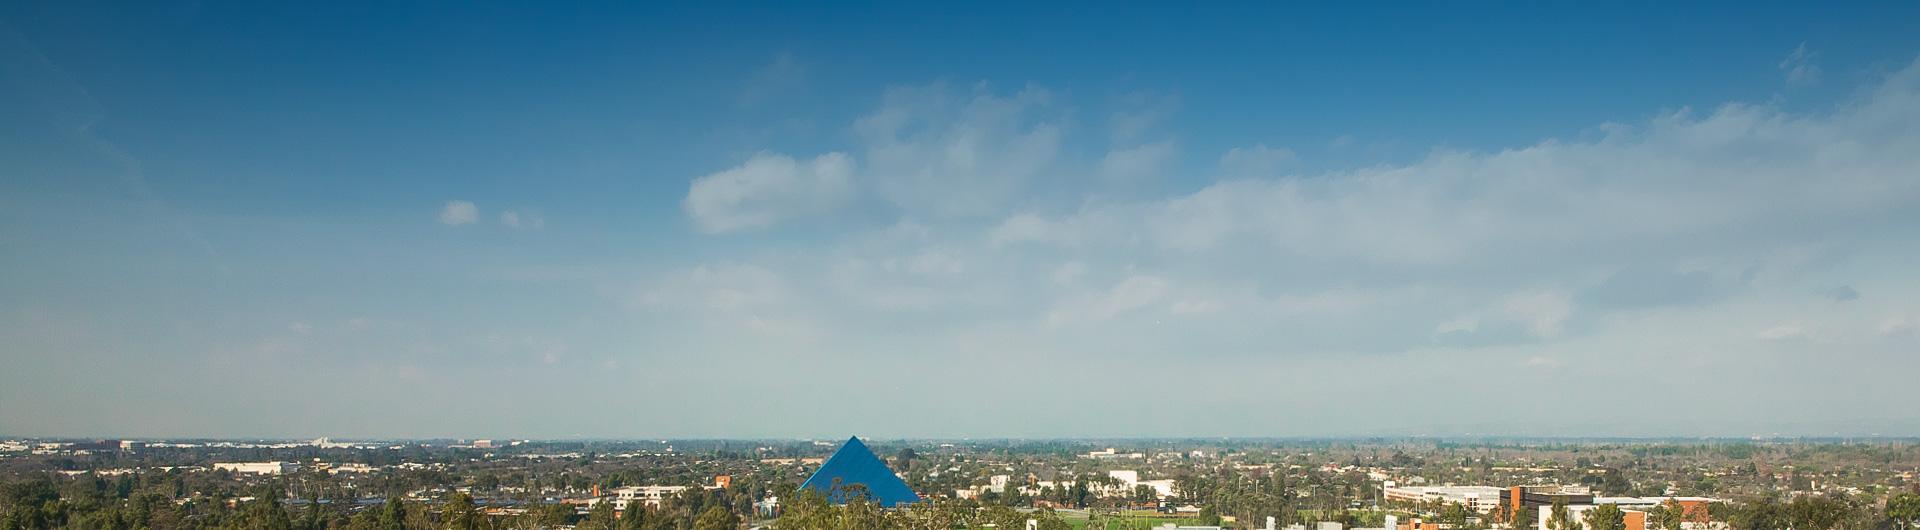 Aerial view of the CSULB campus